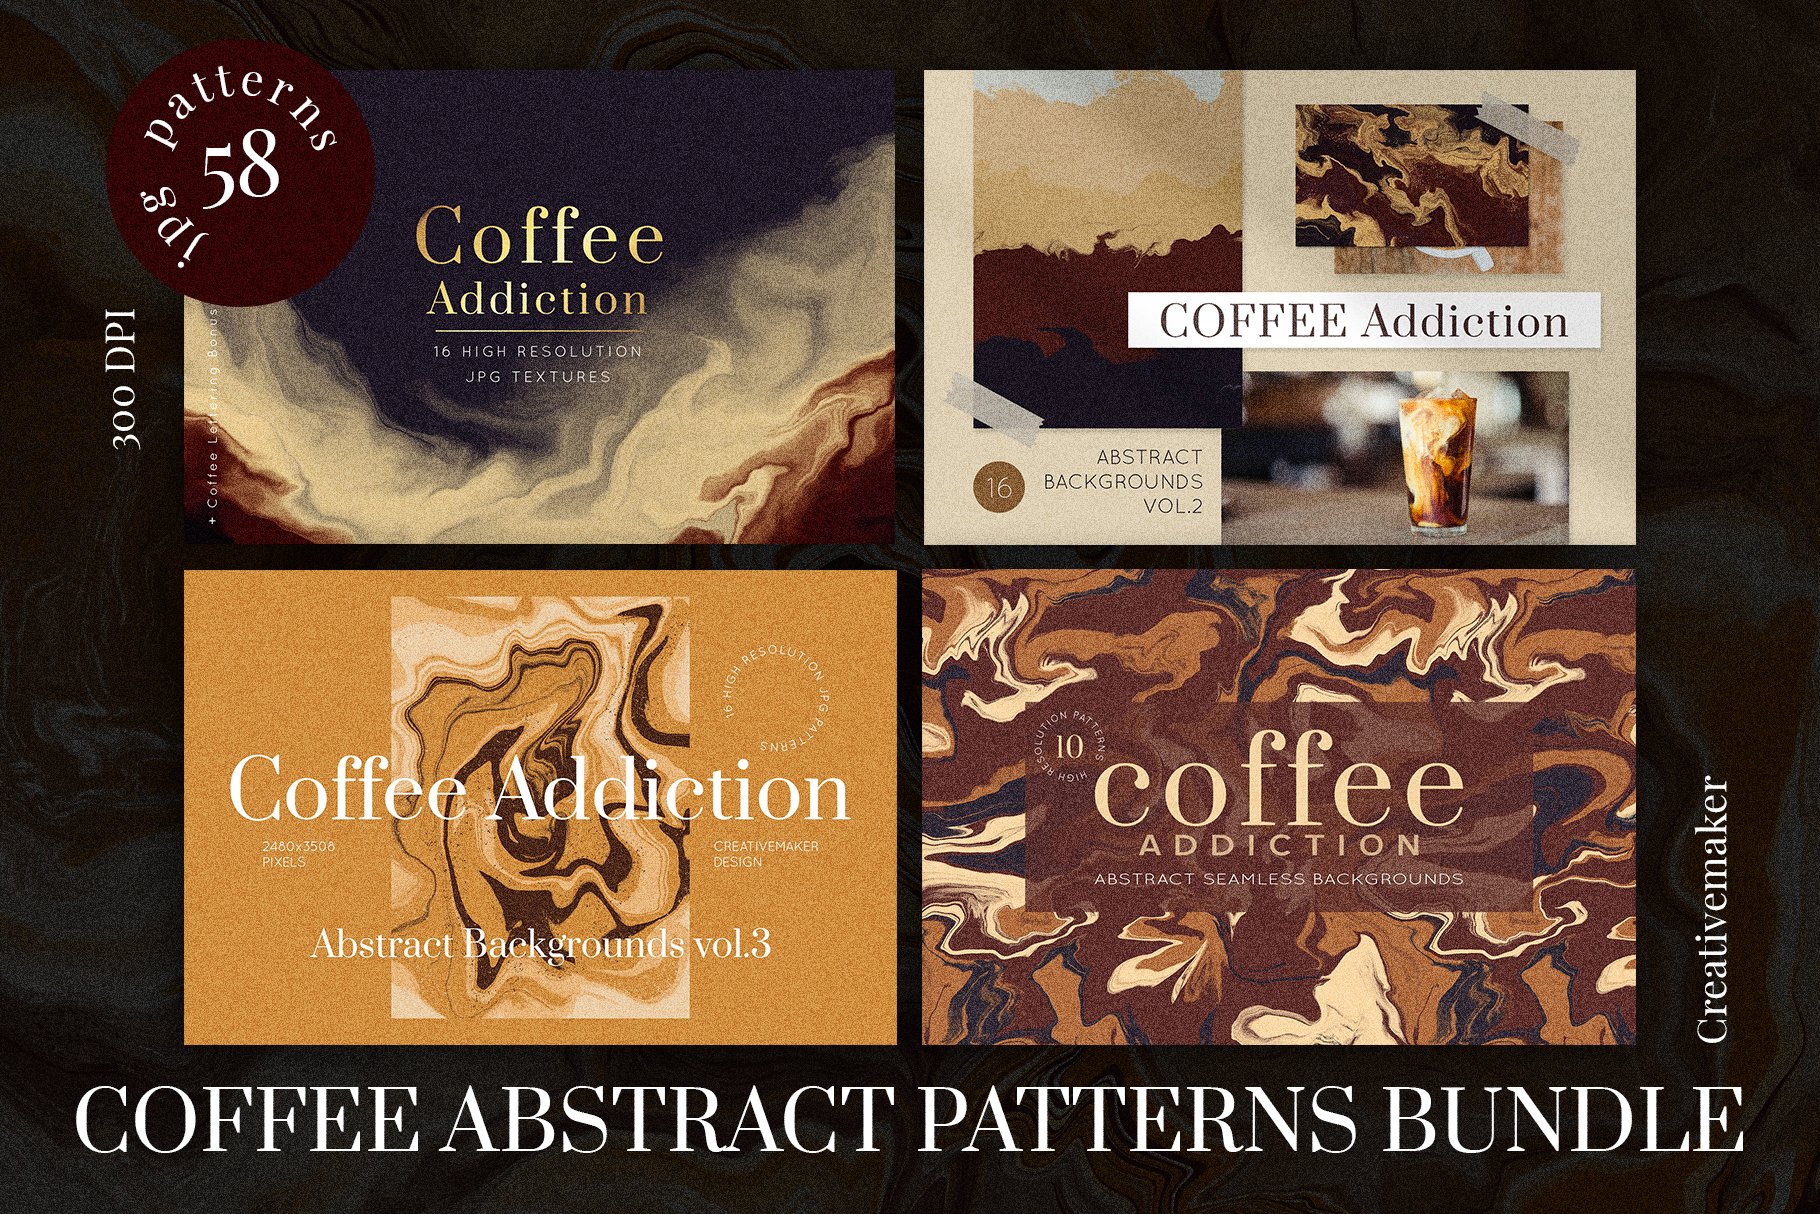 COFFEE ABSTRACT PATTERNS BUNDLE cover image.